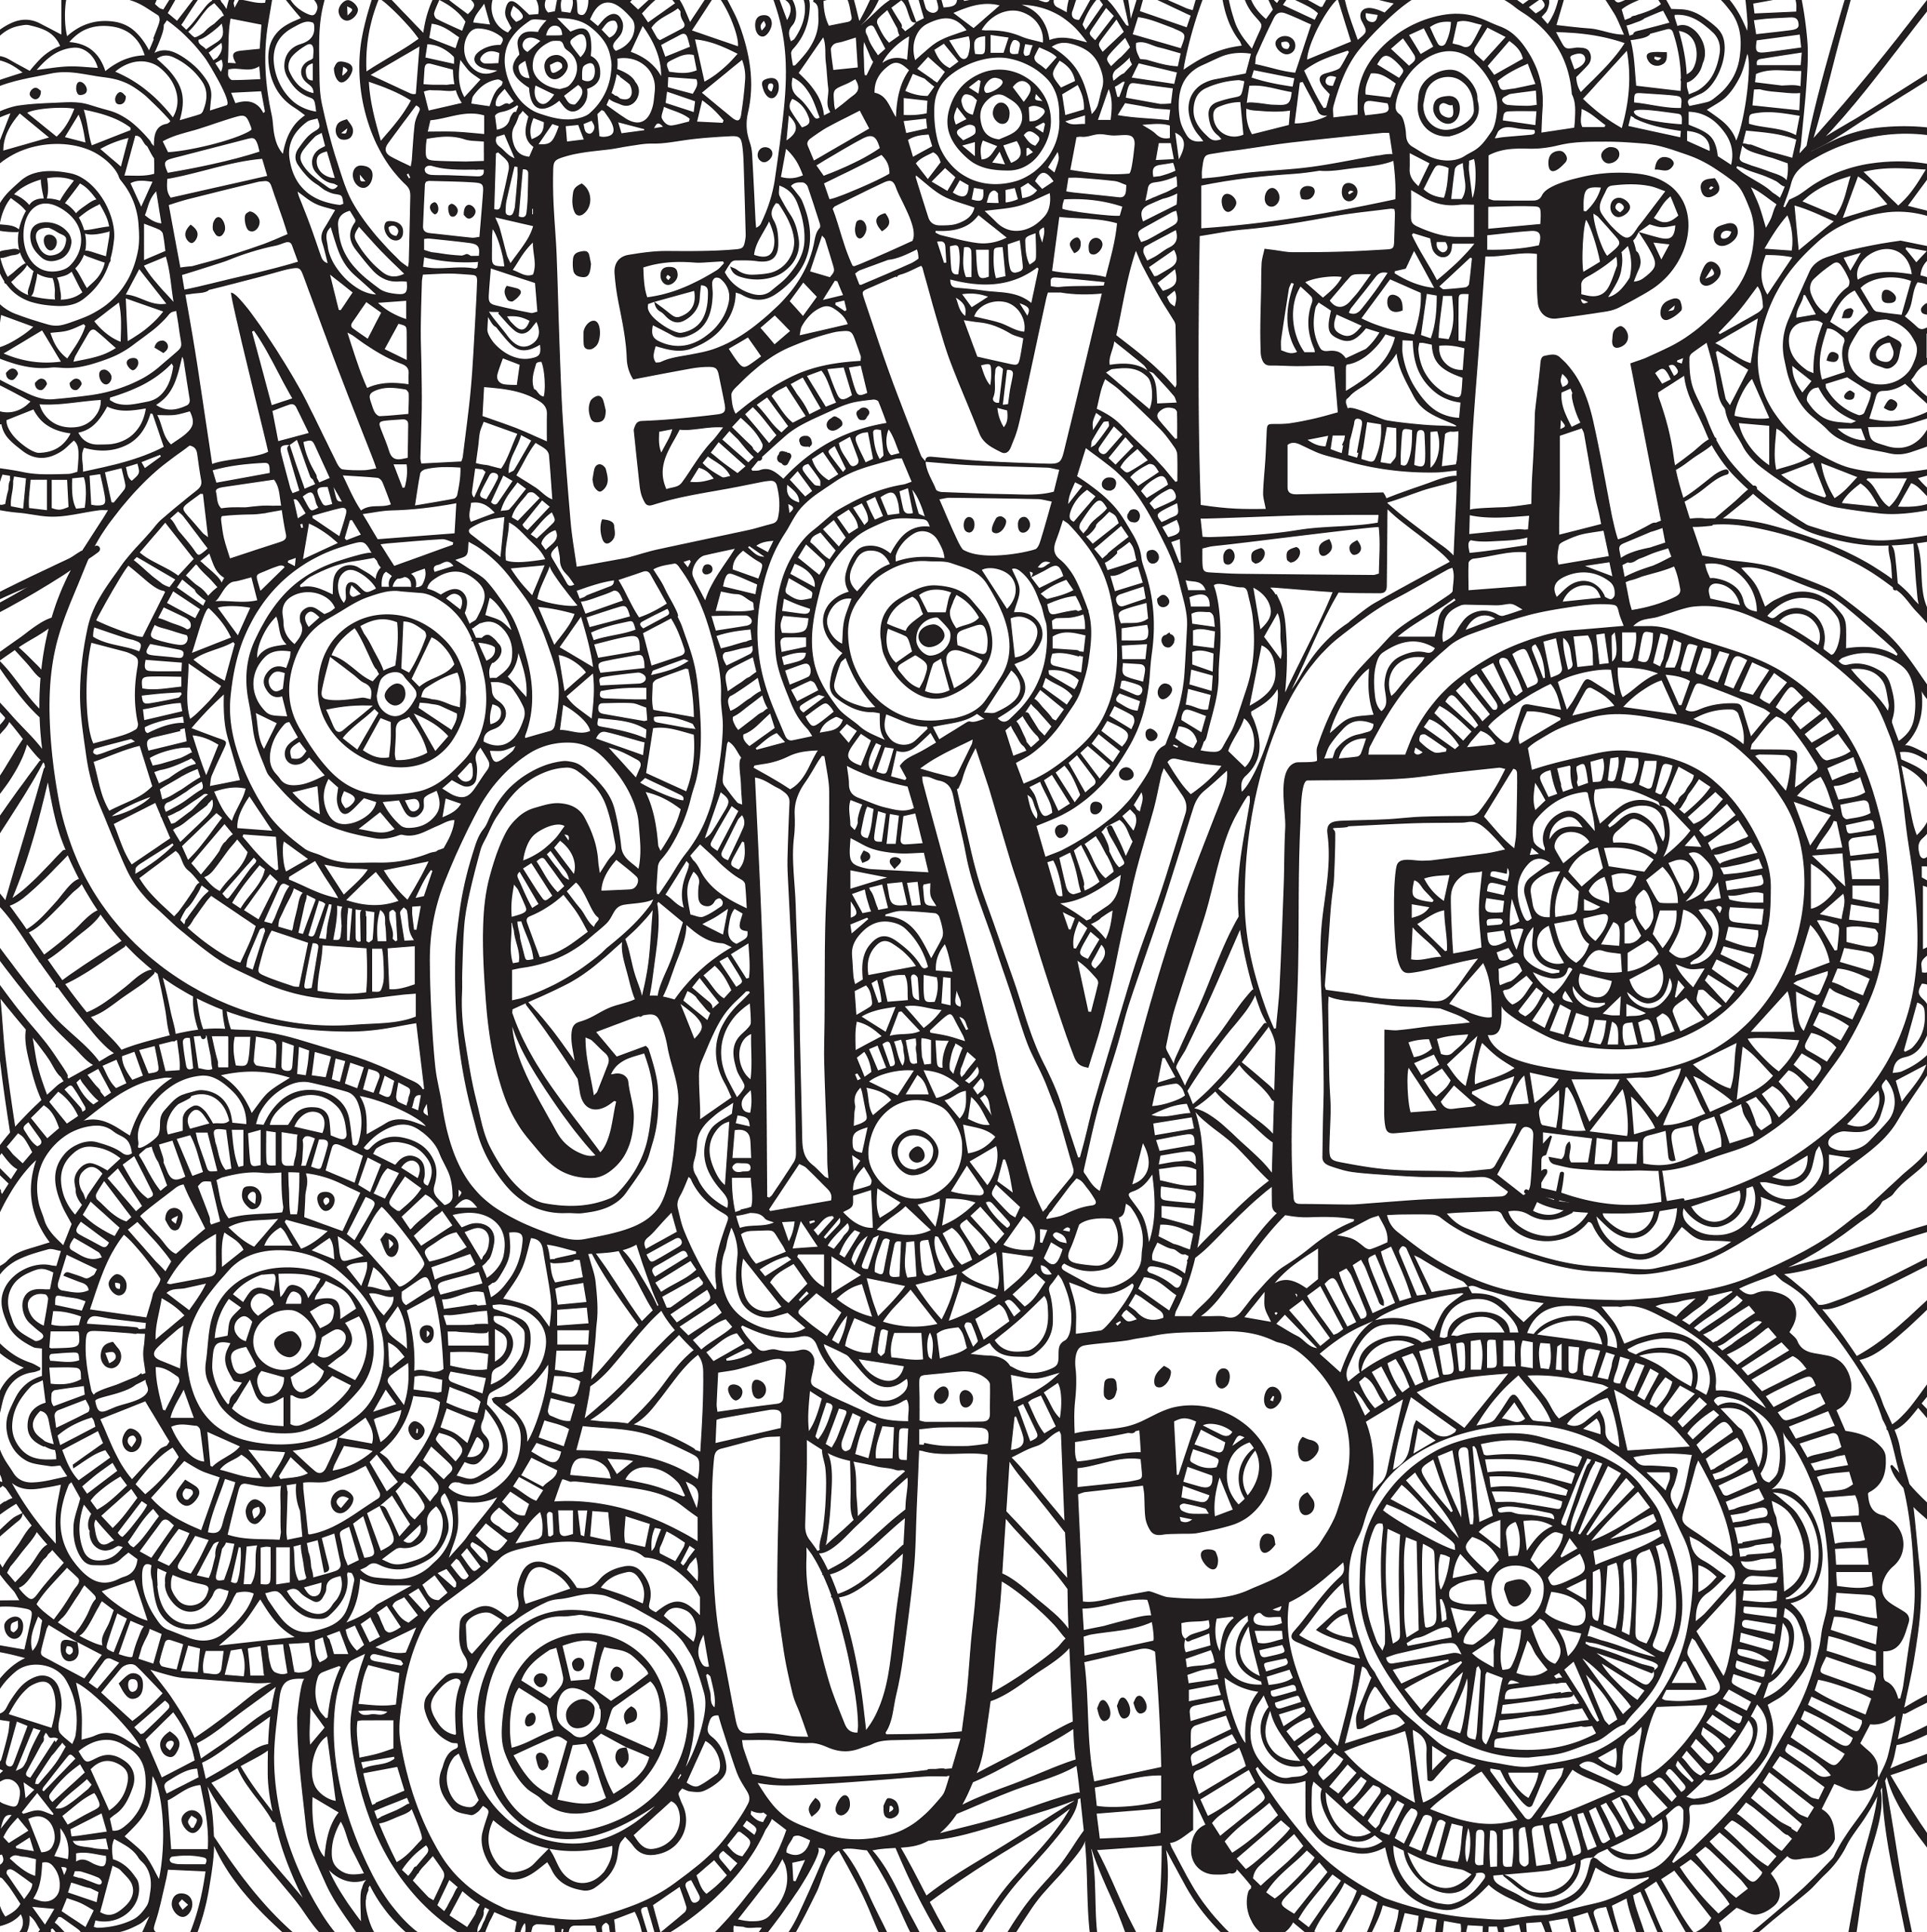 Motivational Coloring Pages For Adults At GetDrawings Free Download